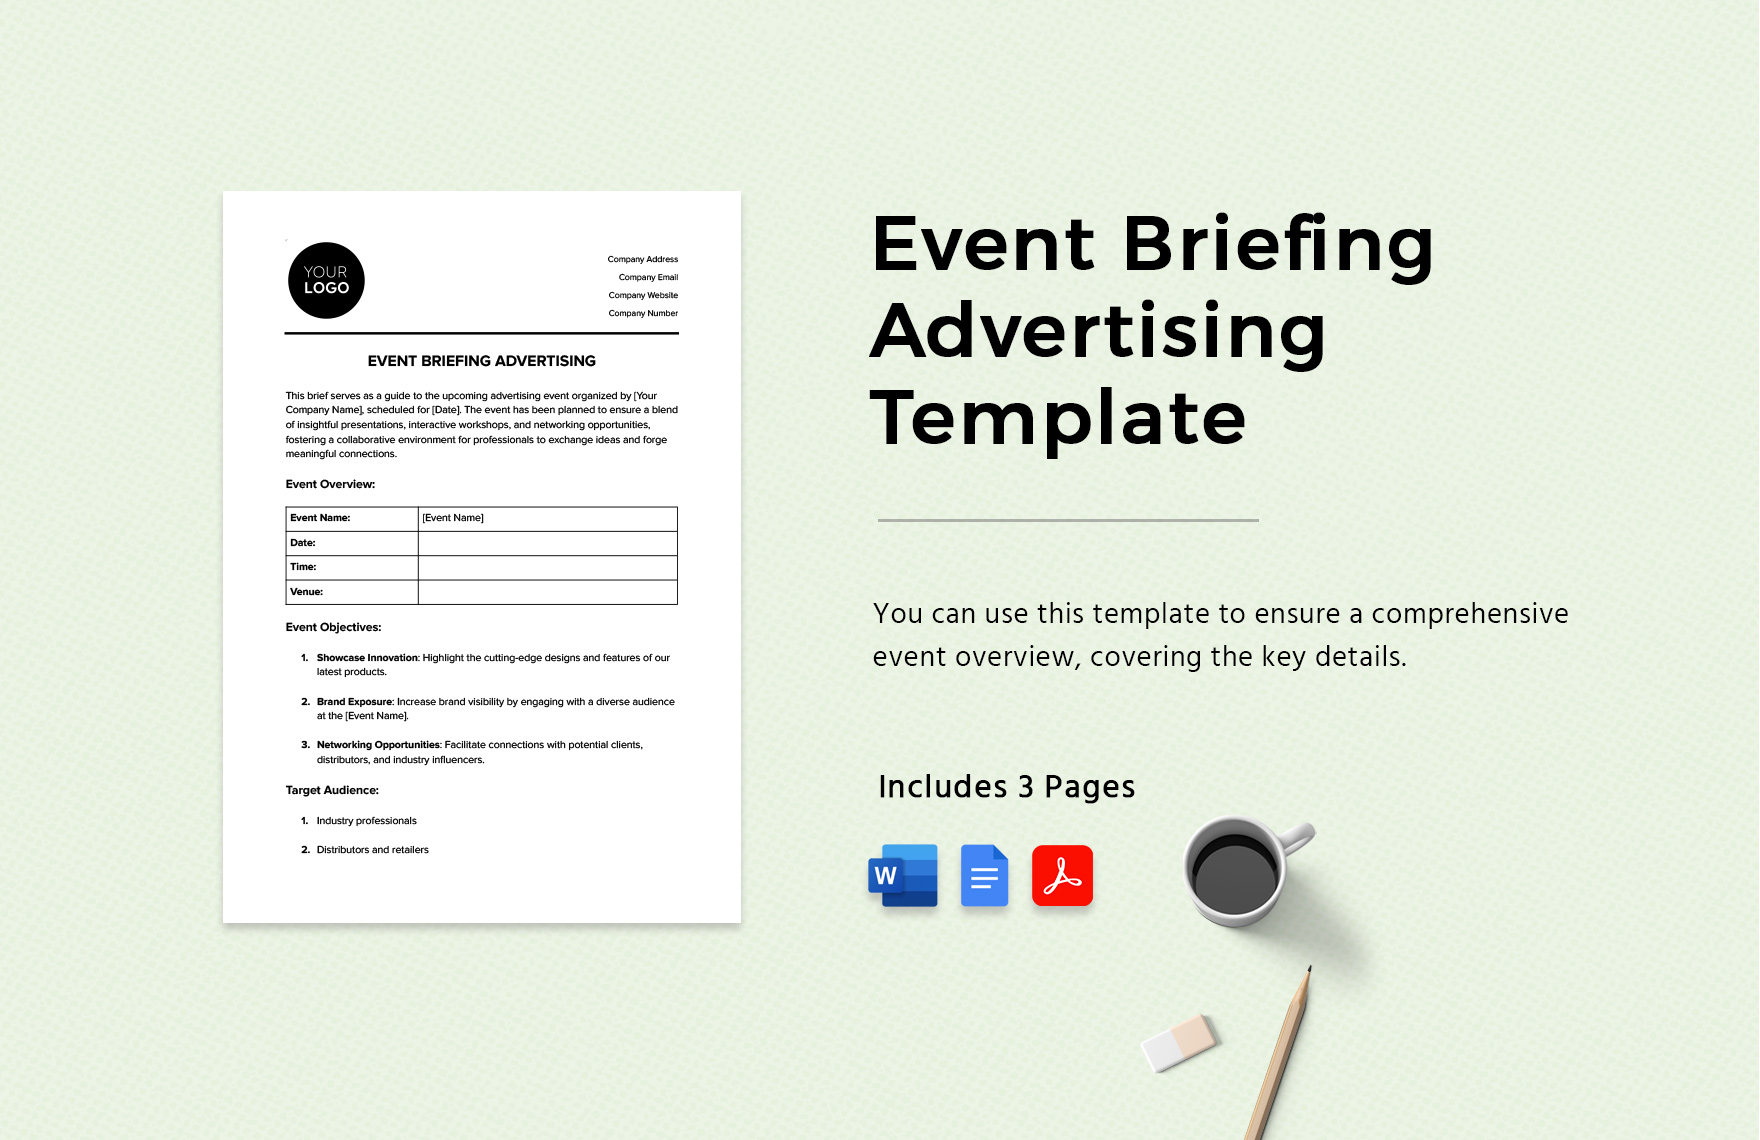 Event Briefing Advertising Template in Word, Google Docs, PDF